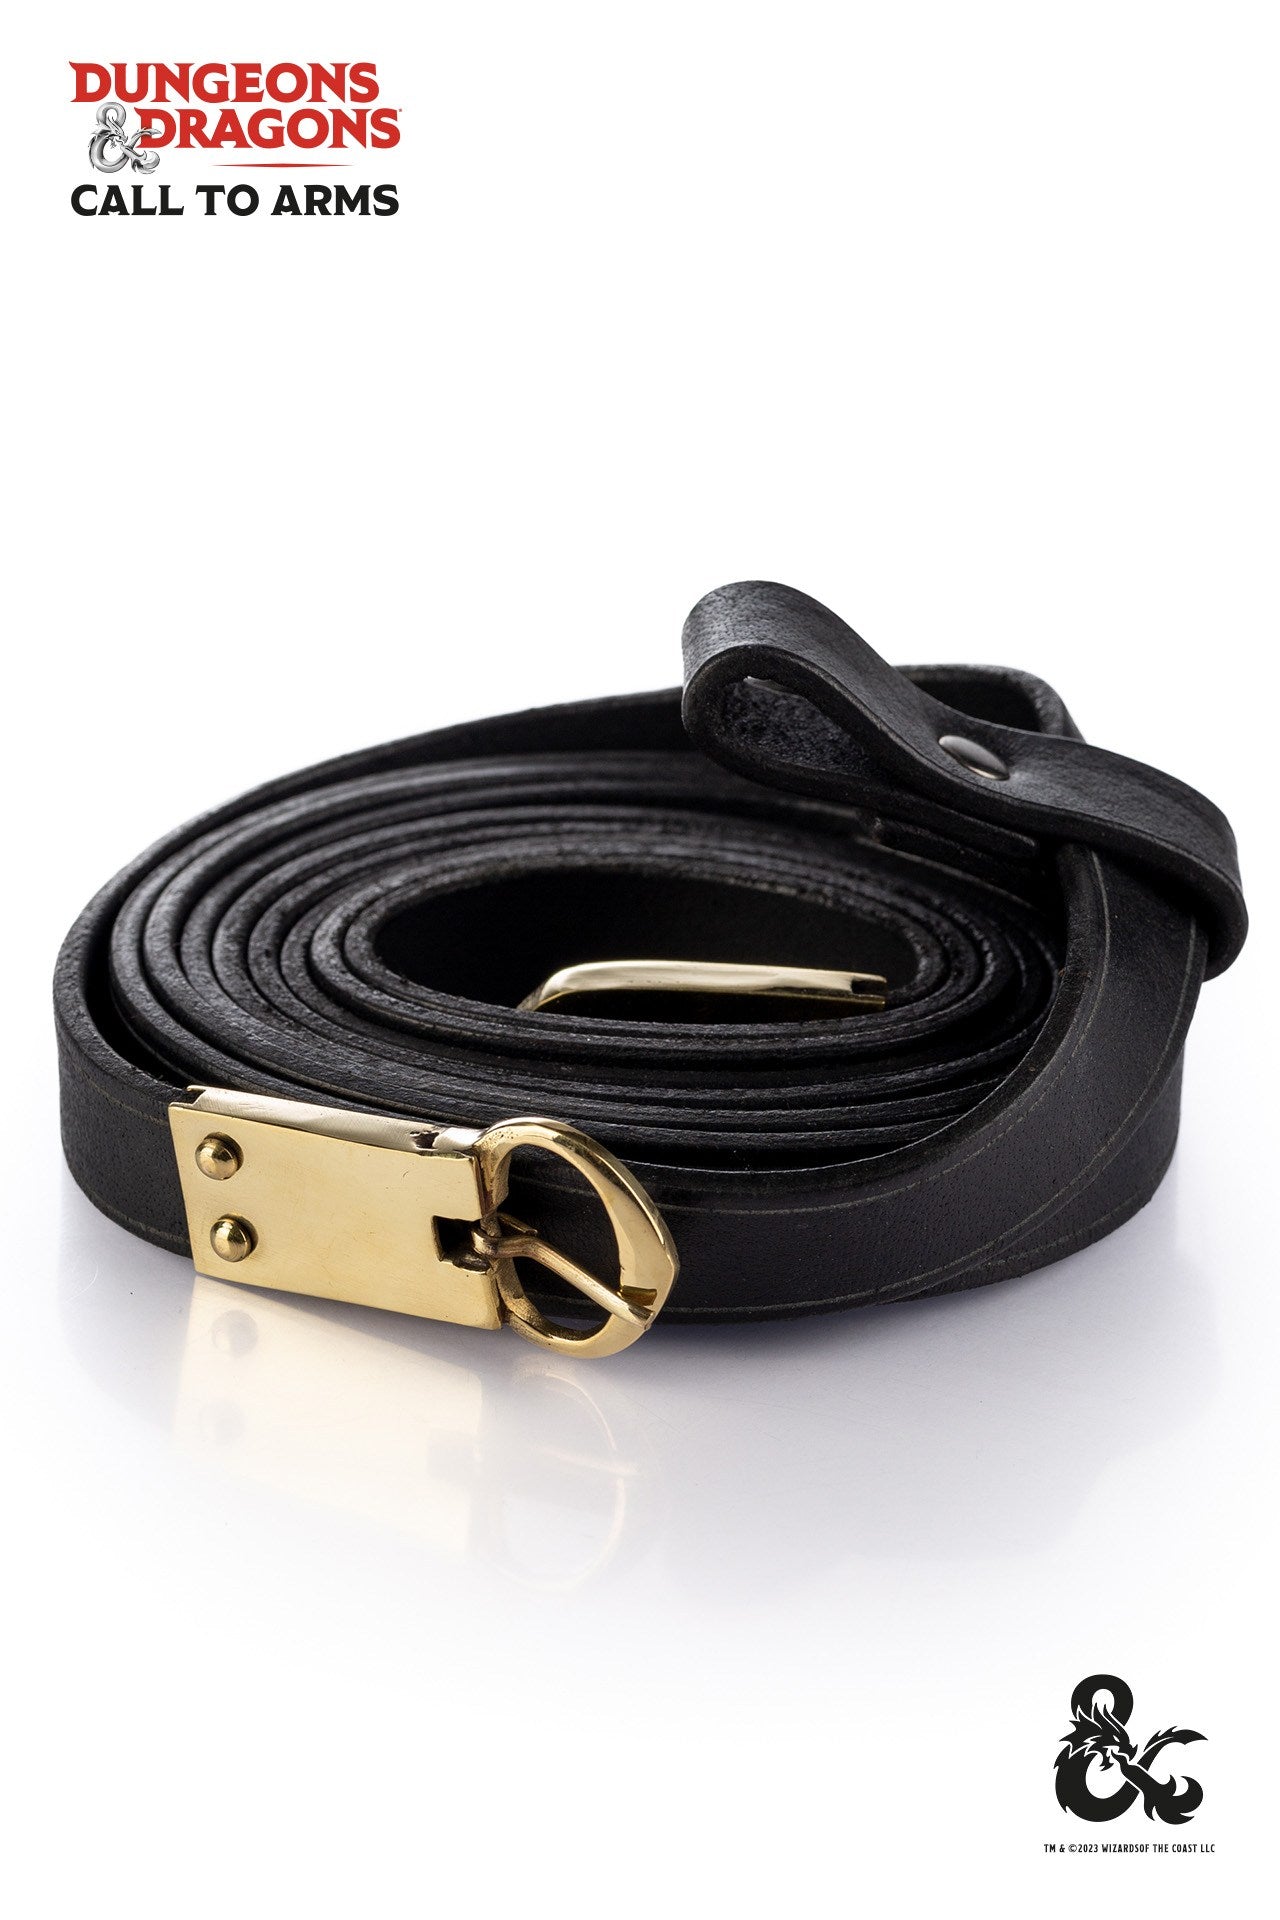 Dungeons & Dragons Double Leather Belt Black